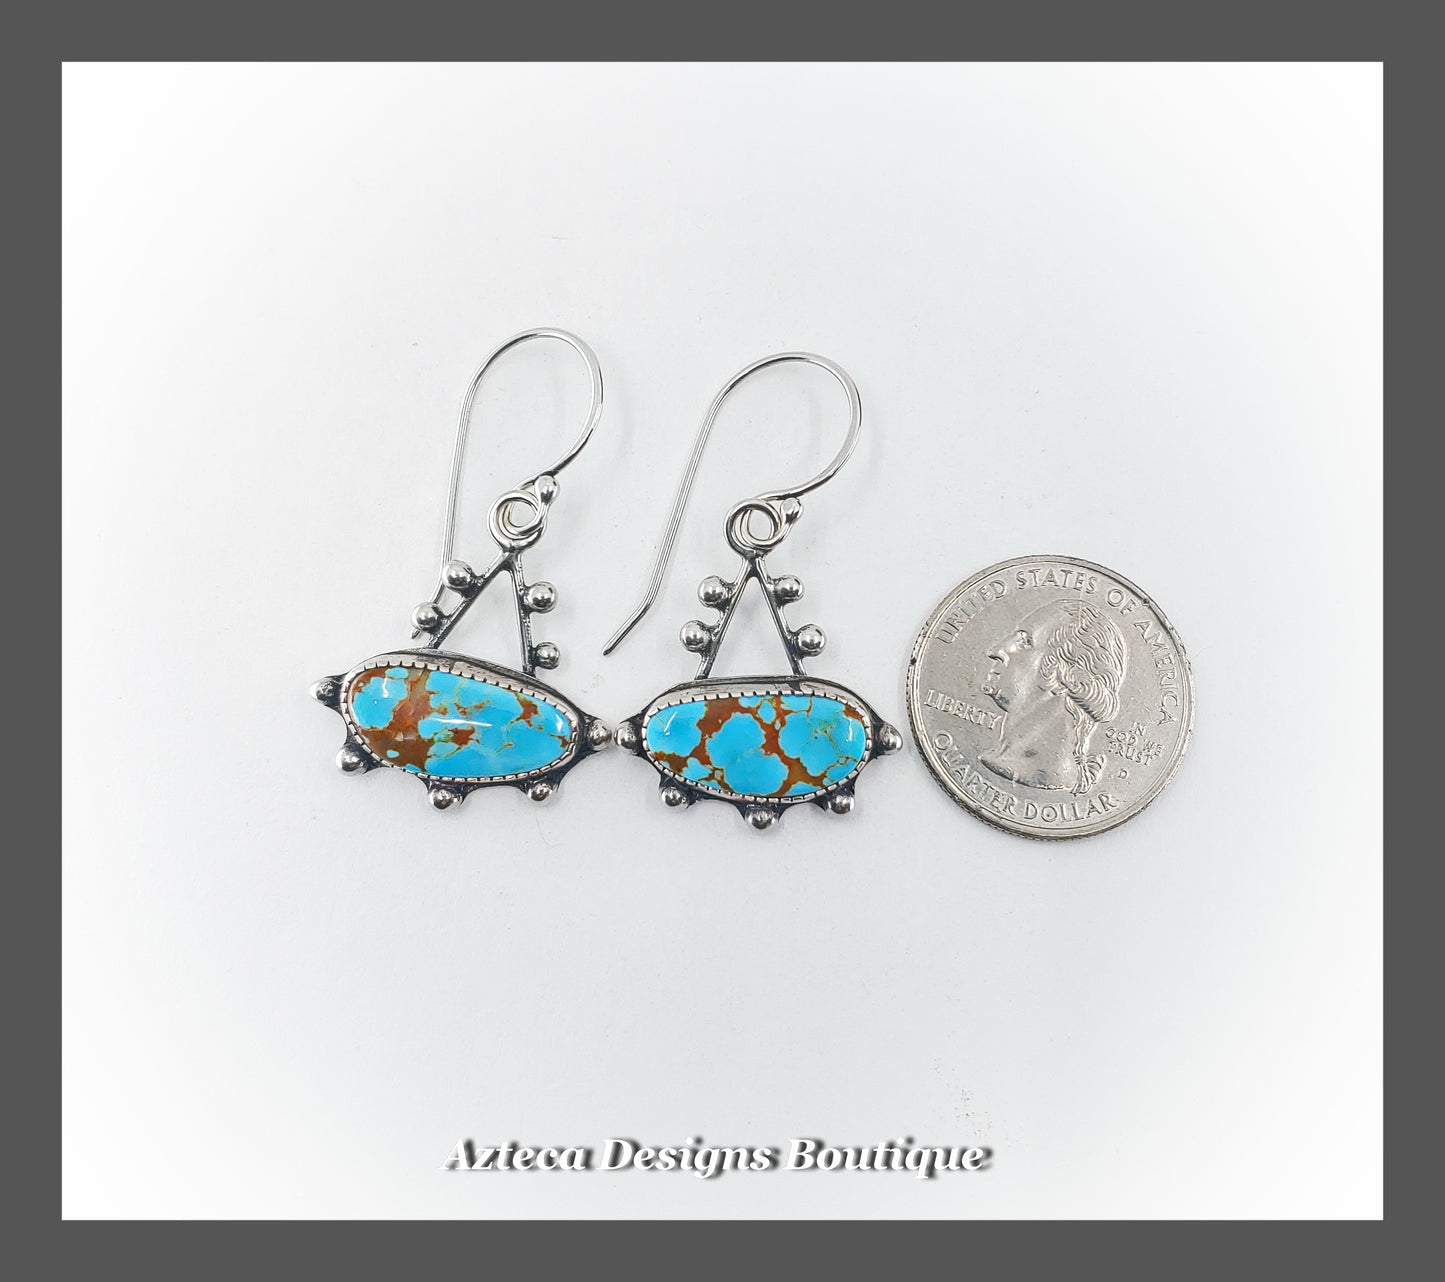 Number 8 Turquoise + Argentium Silver Hand Fabricated Granulation Drop Earrings